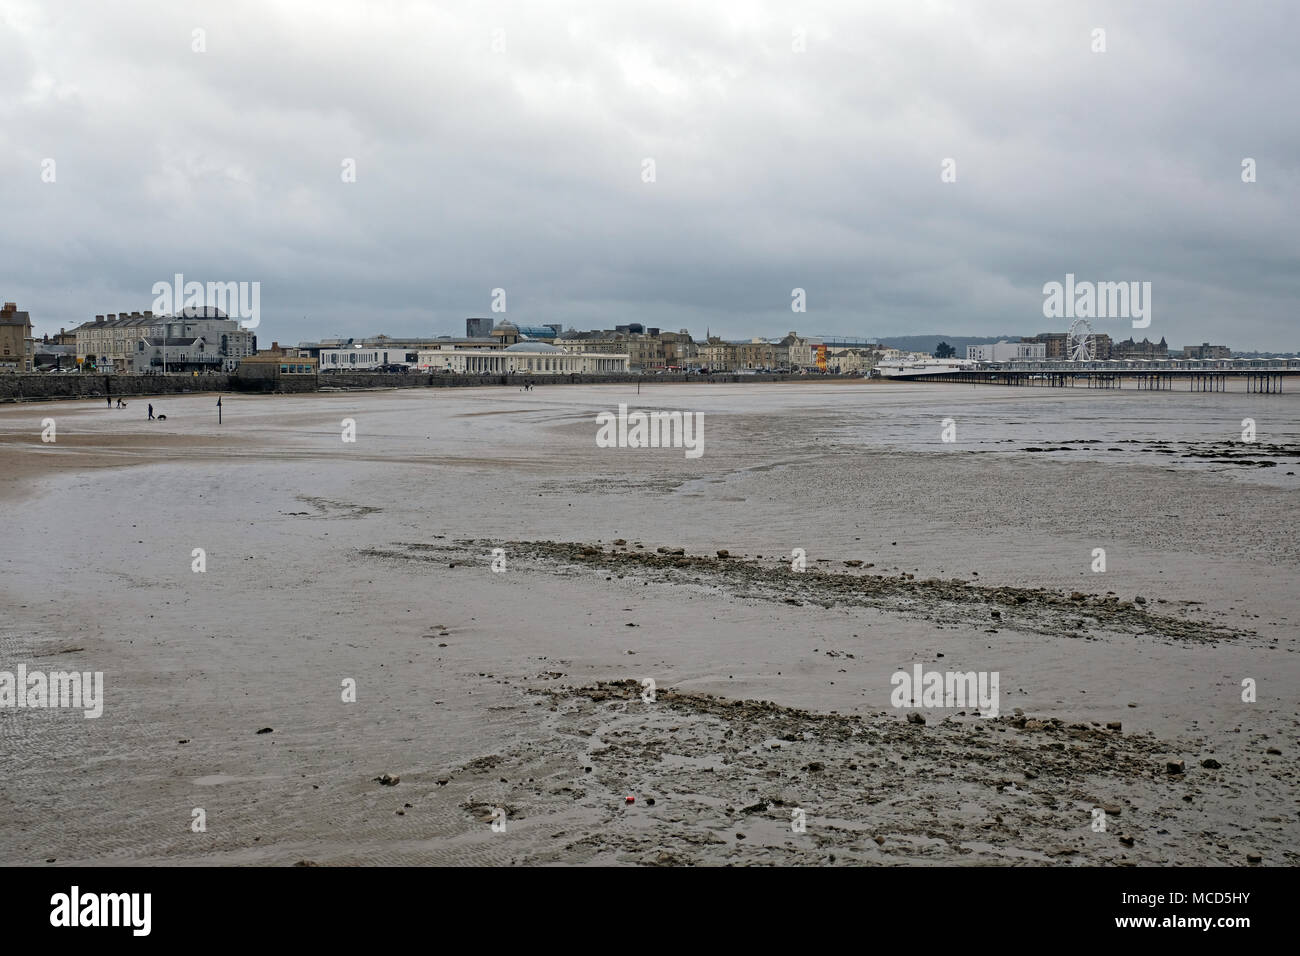 Weston-super-Mare, UK. 16th April, 2018. UK weather: an almost deserted beach on an overcast, breezy, showery spring afternoon. Keith Ramsey/Alamy Live News Stock Photo